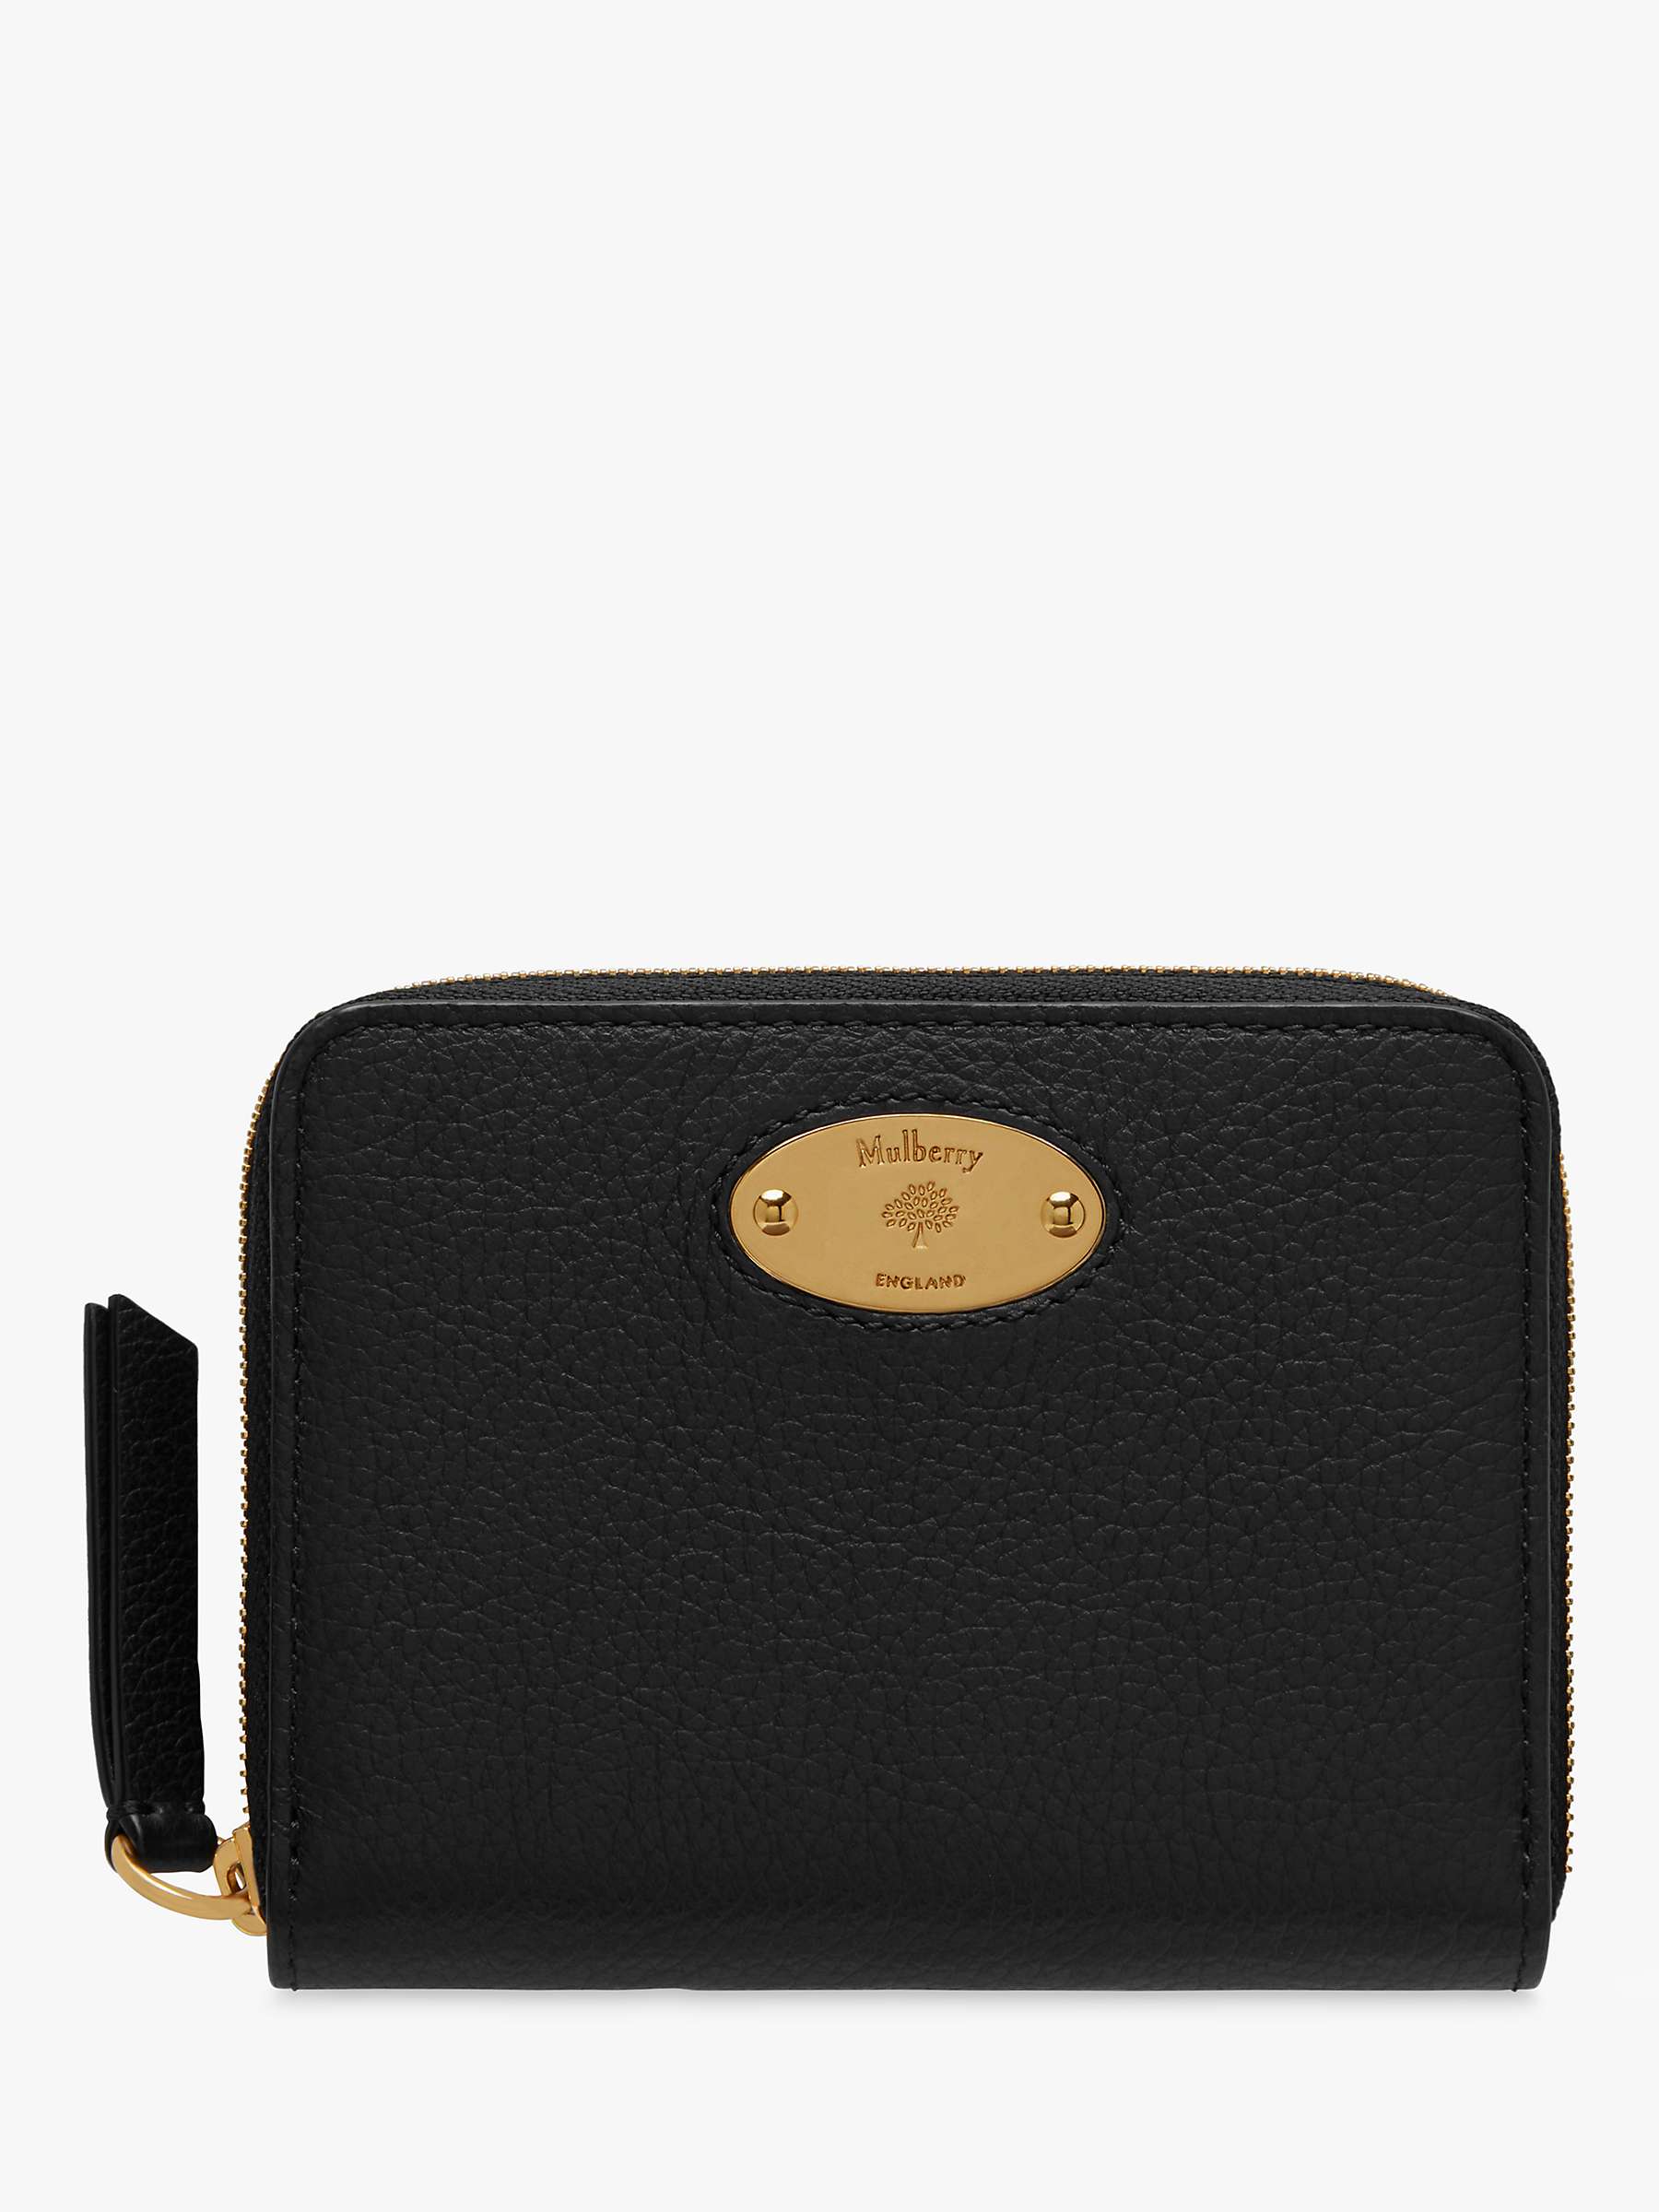 Buy Mulberry Plaque Classic Grain Leather Small Zip Around Purse Online at johnlewis.com